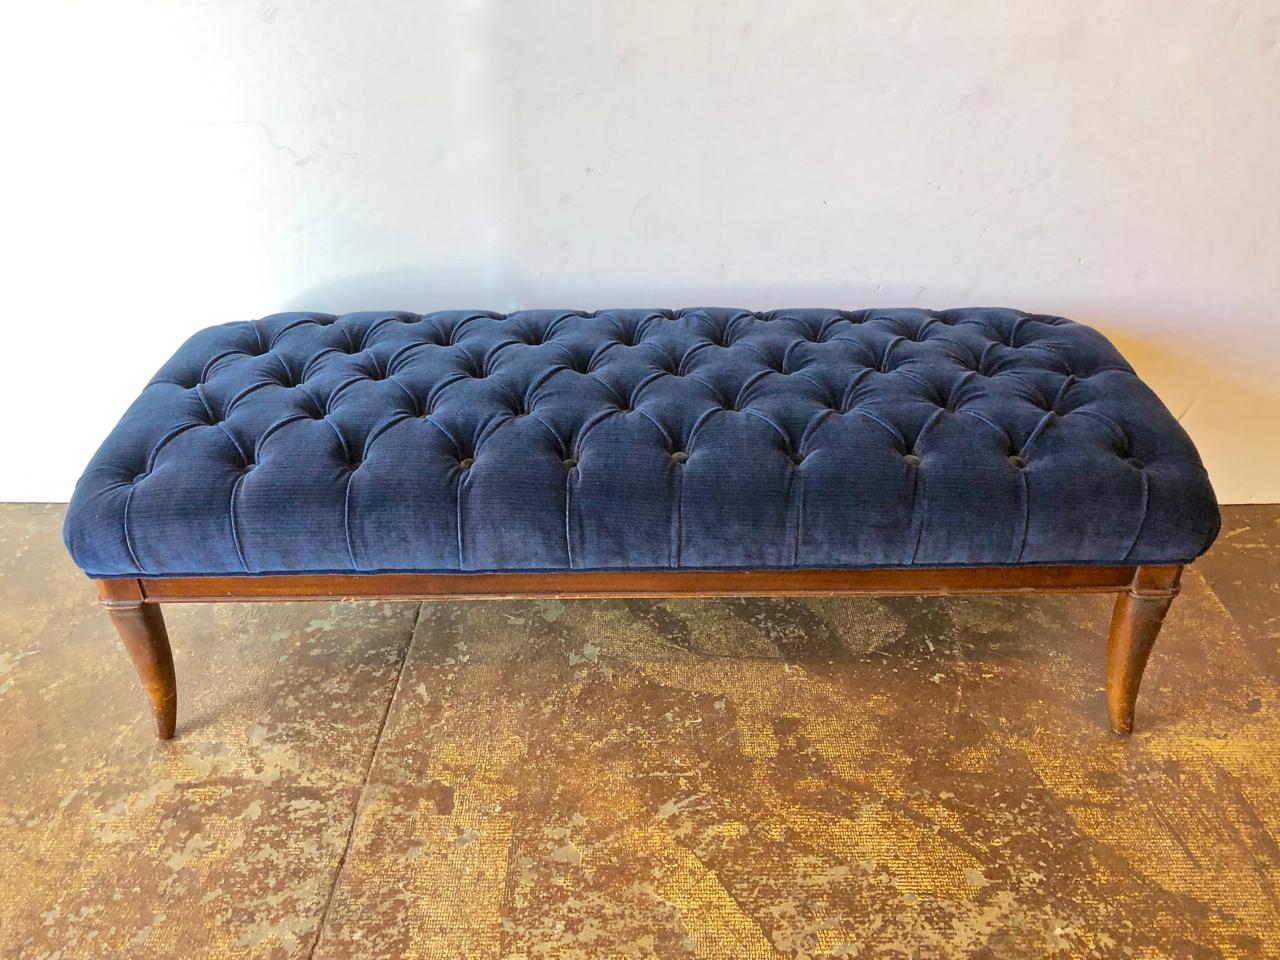 This is a chic midcentury bench in the style of Robsjohn-Gibbings that is. Newly upholstered in a rich blue Clarence House velvet. The tufting is of the highest level of craftsmanship, making this bench a stand out. The saber legs and generous